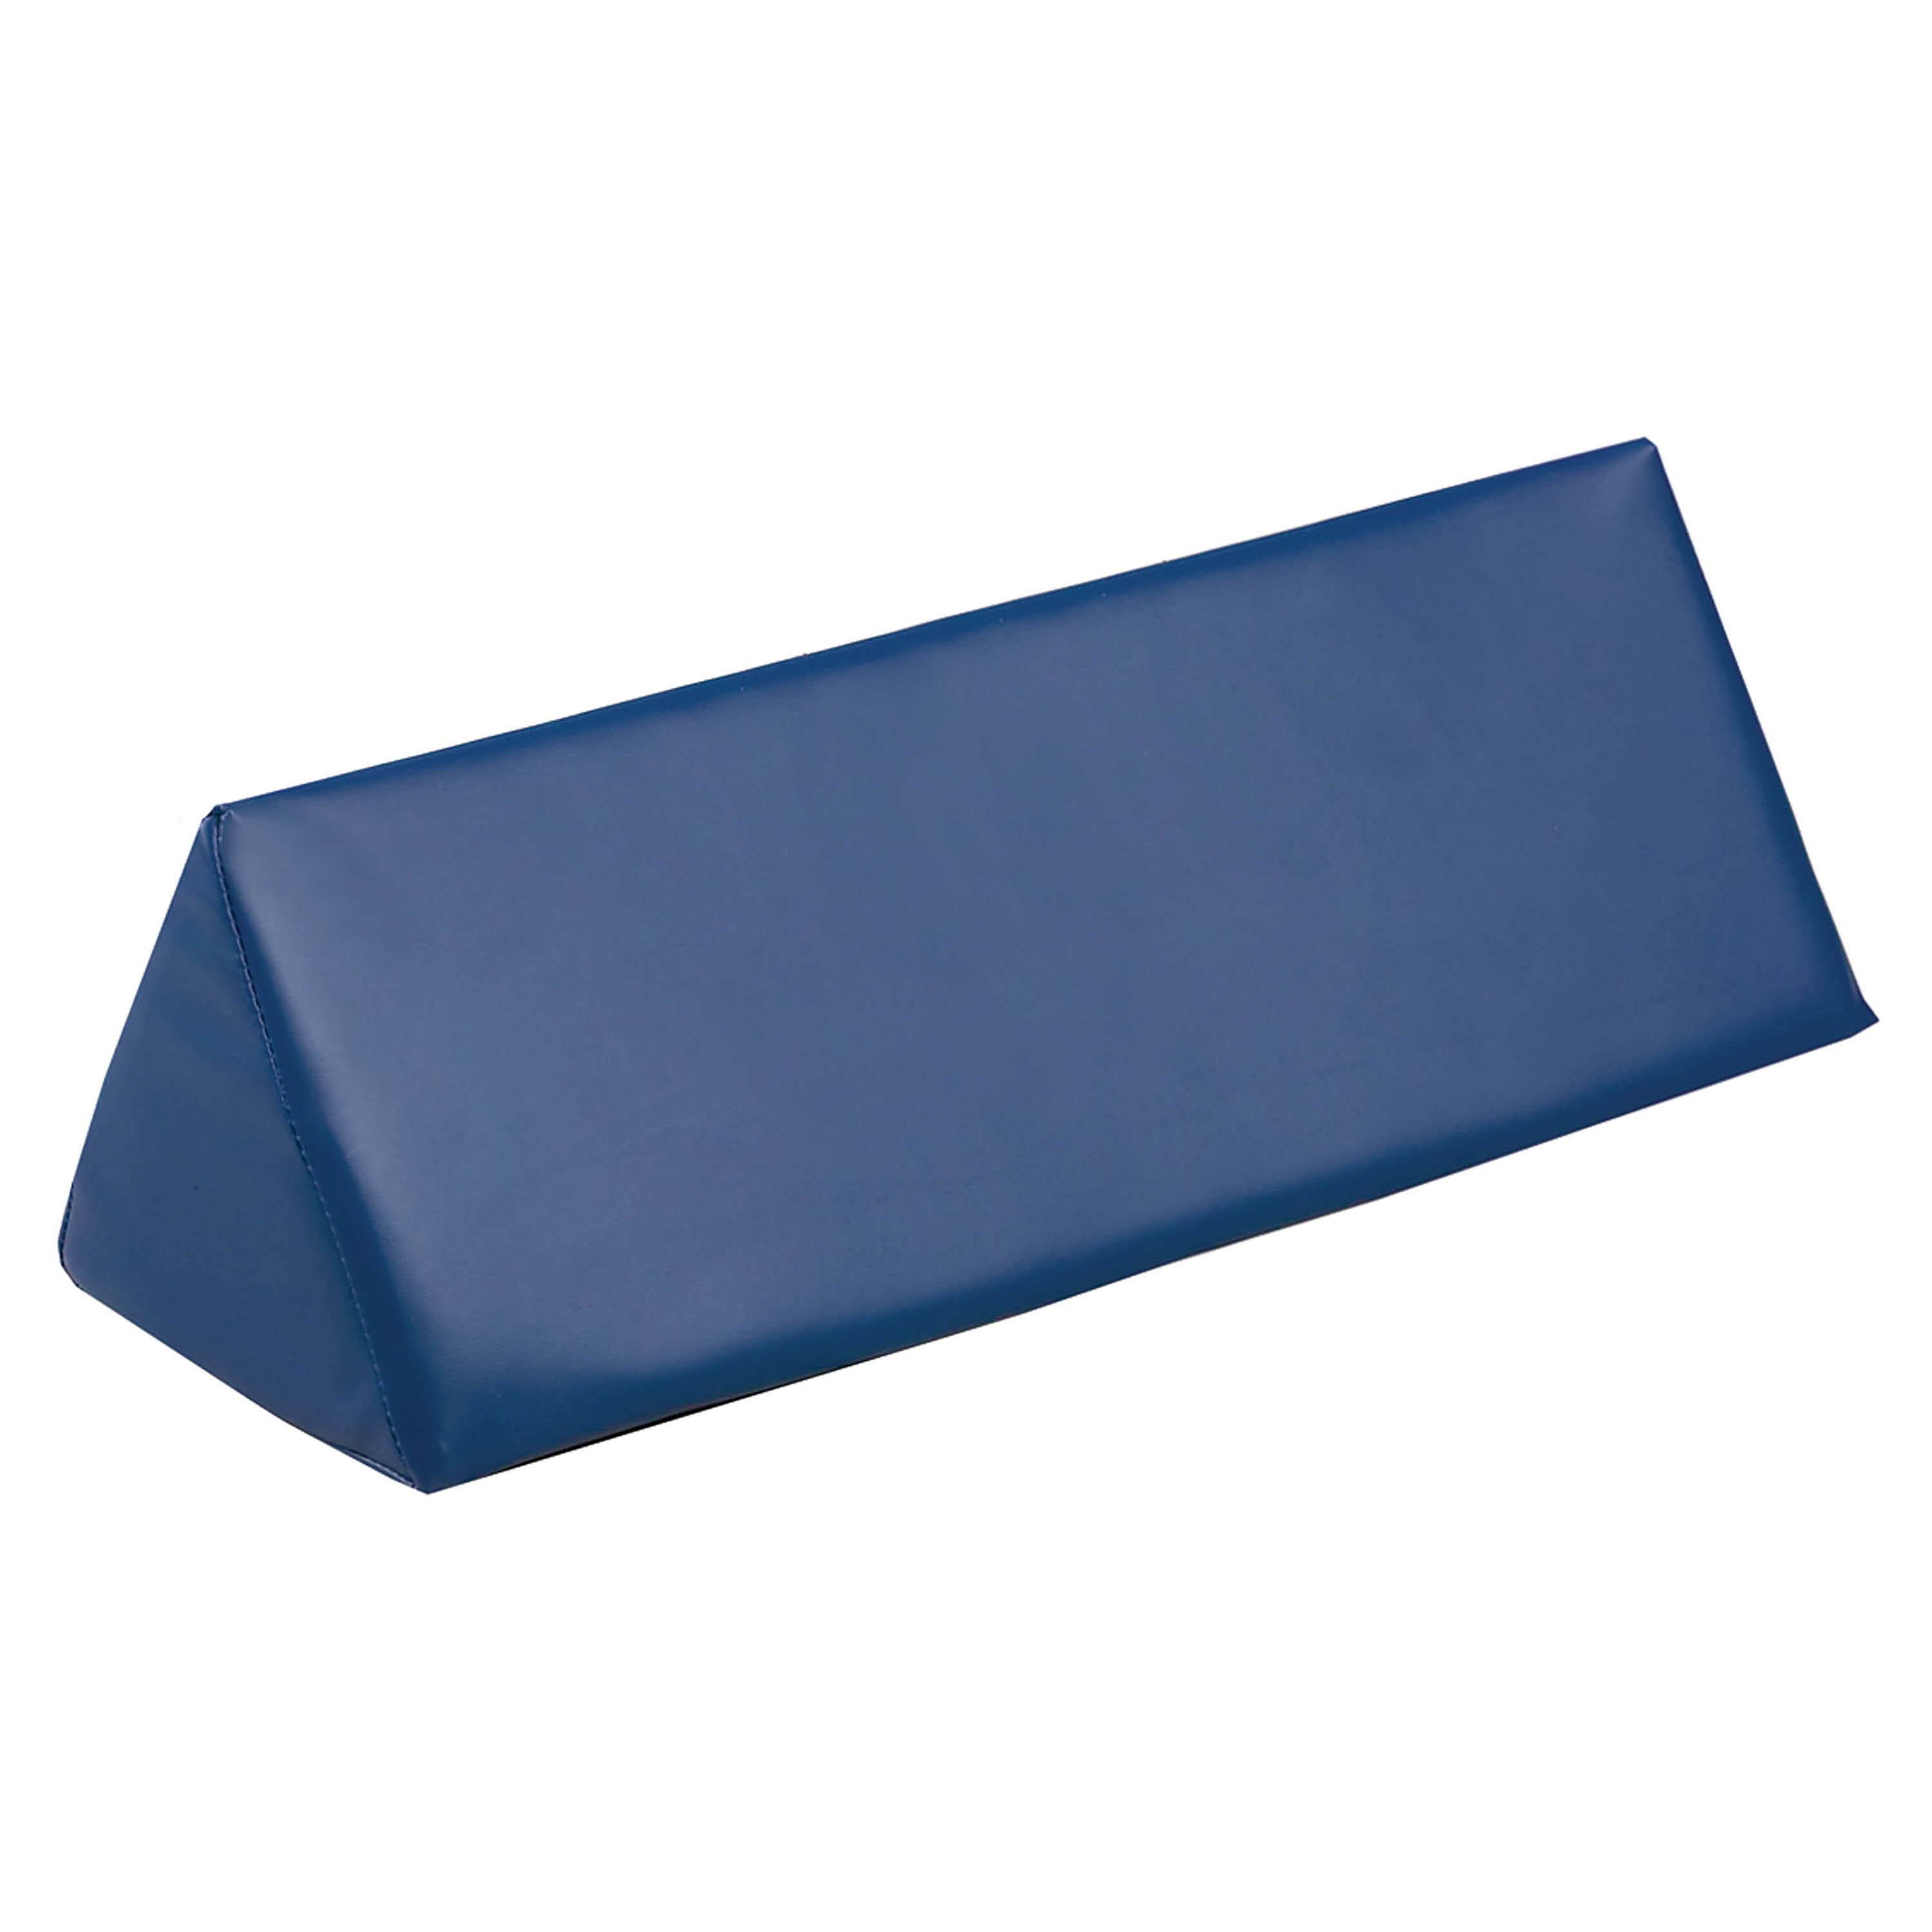 https://www.universalmedicalinc.com/media/catalog/product/cache/f176254afc5001a35a1c727280299a84/y/v/yvfo_vinyl-covered-45-degree-spinal-wedge-bolster-sponge.jpg